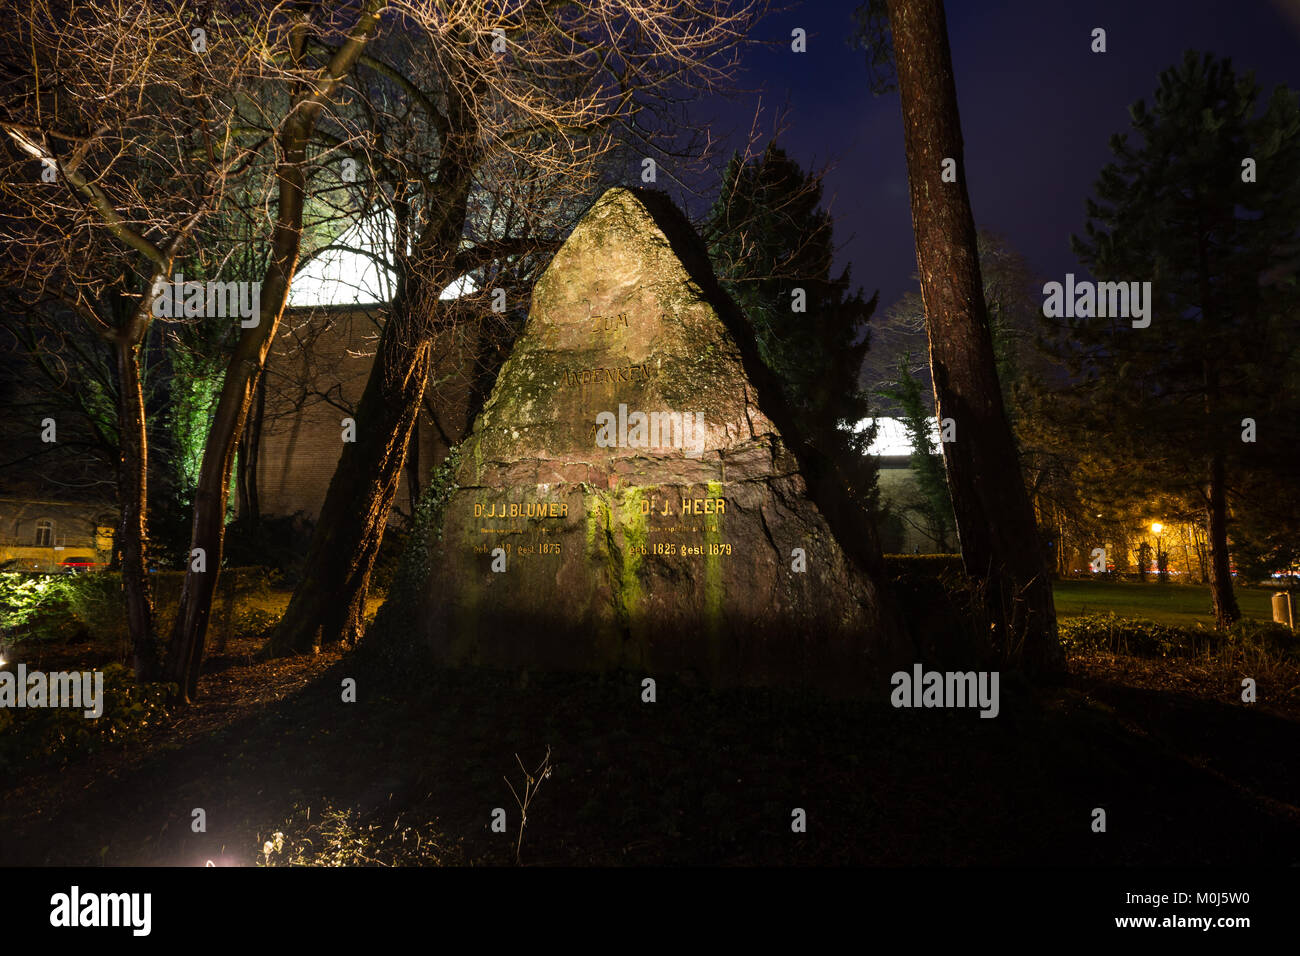 Memorial stone for the presidents Blumer and Heer in Glarus, Canton of Glarus, Switzerland by night Stock Photo